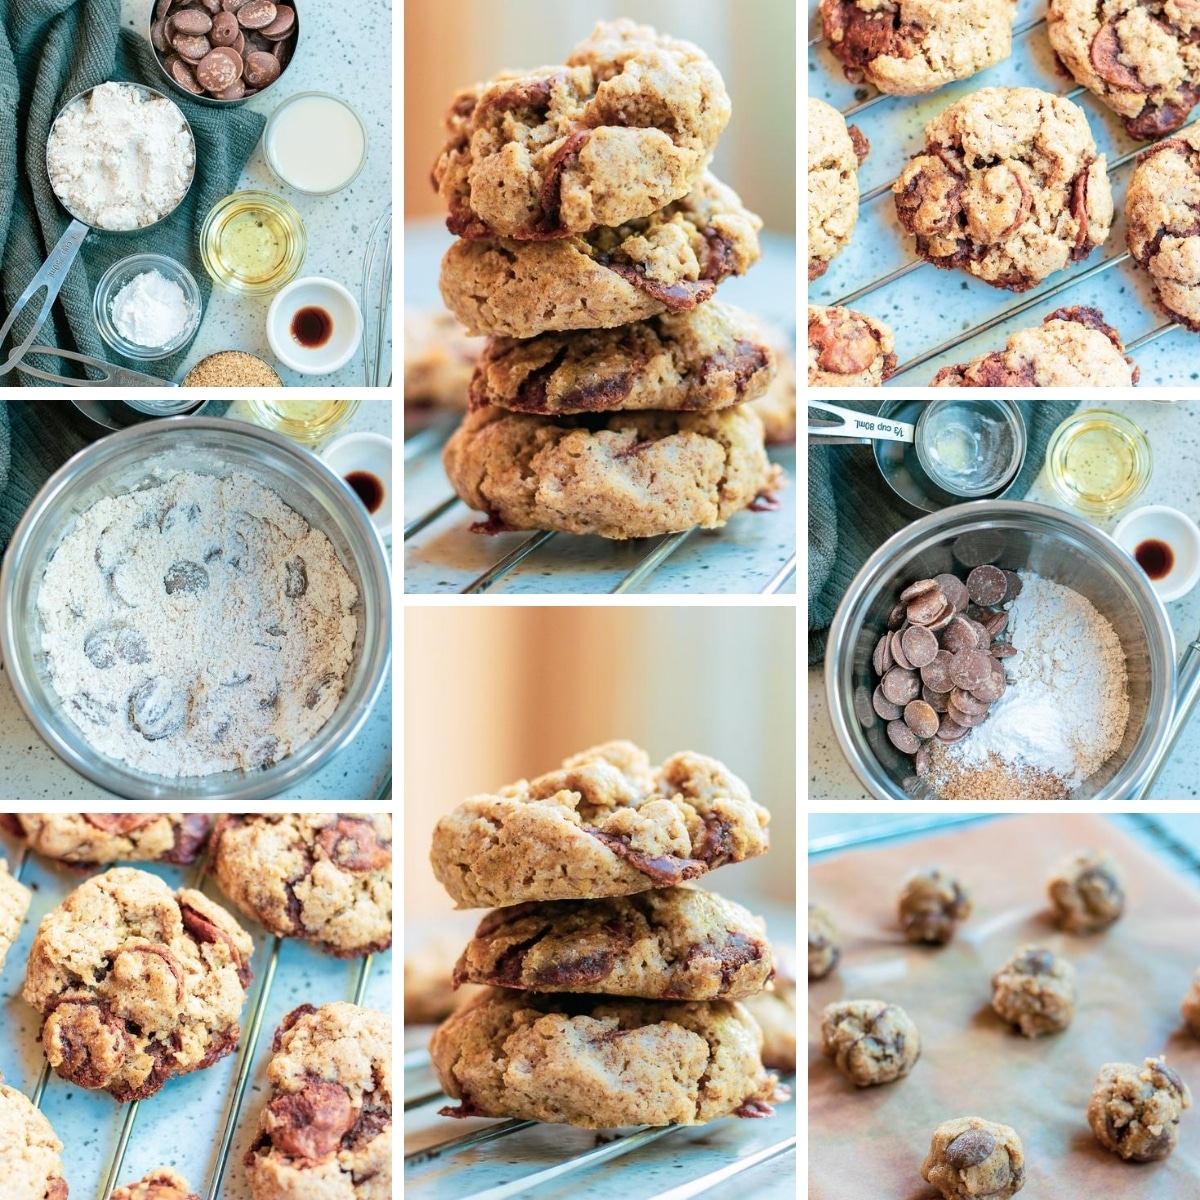 collage of images showing how to make vegan gluten free chocolate chip cookies